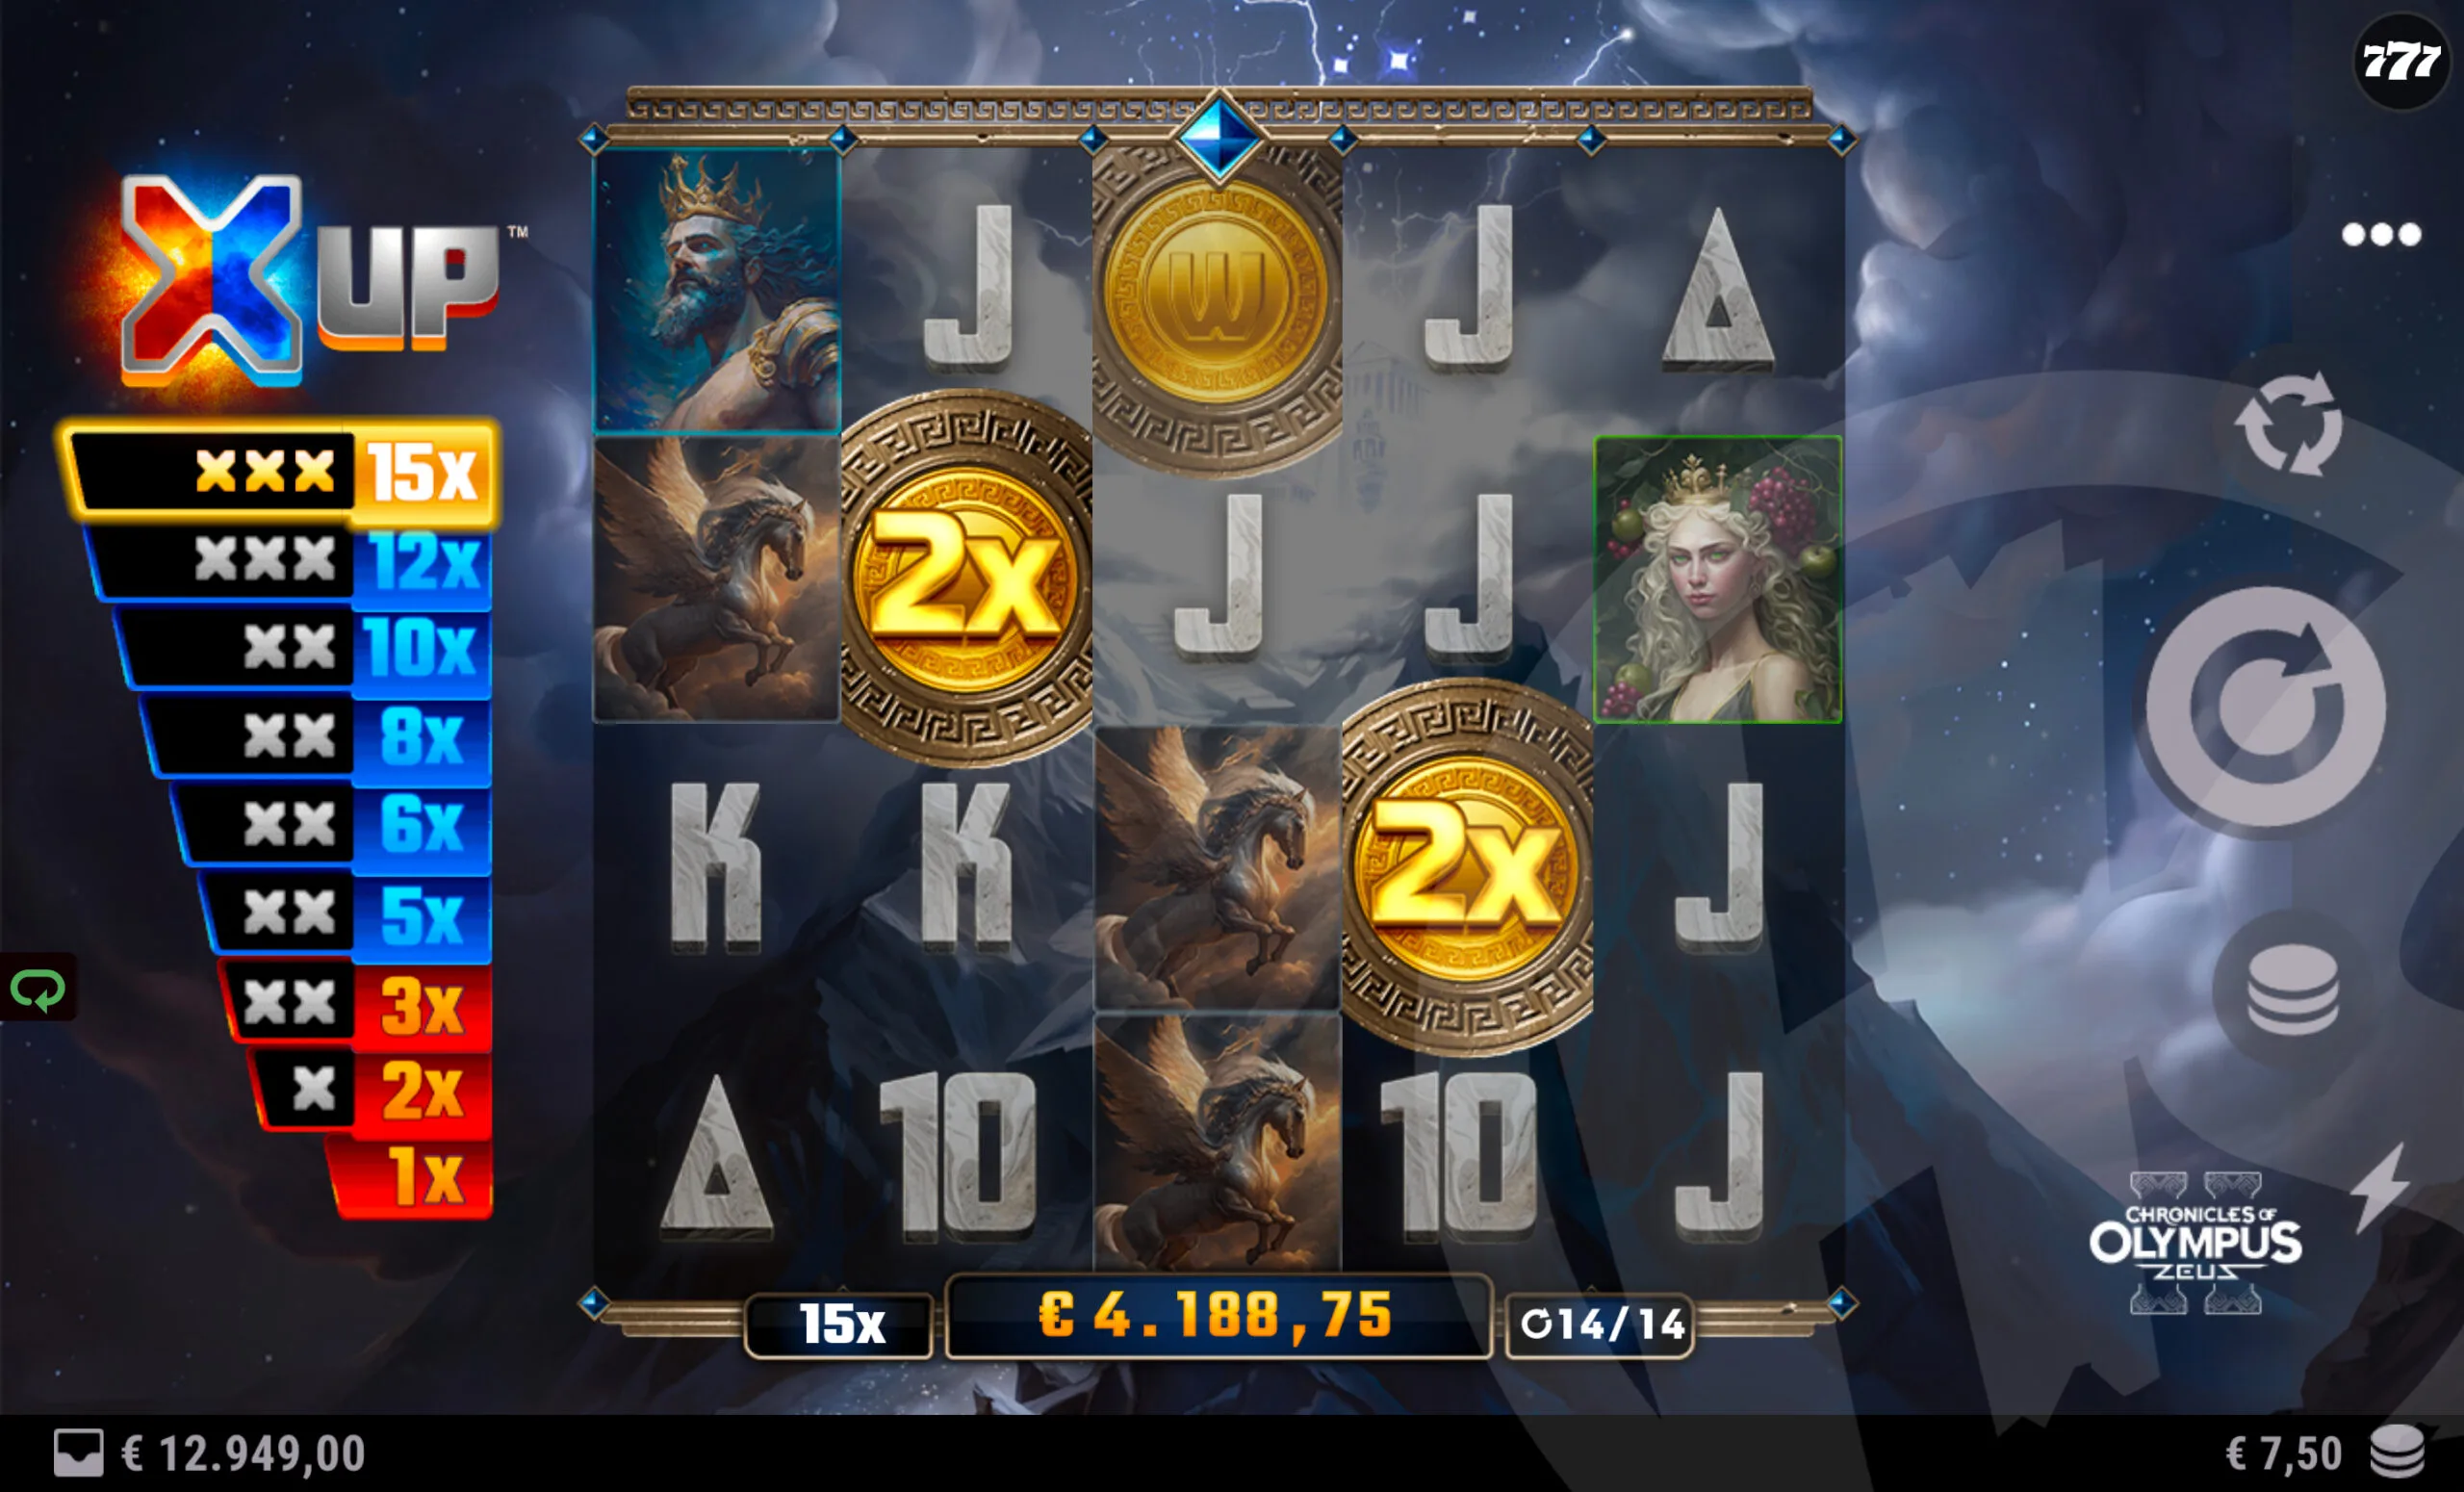 Chronicles of Olympus II - Zeus Free Spins